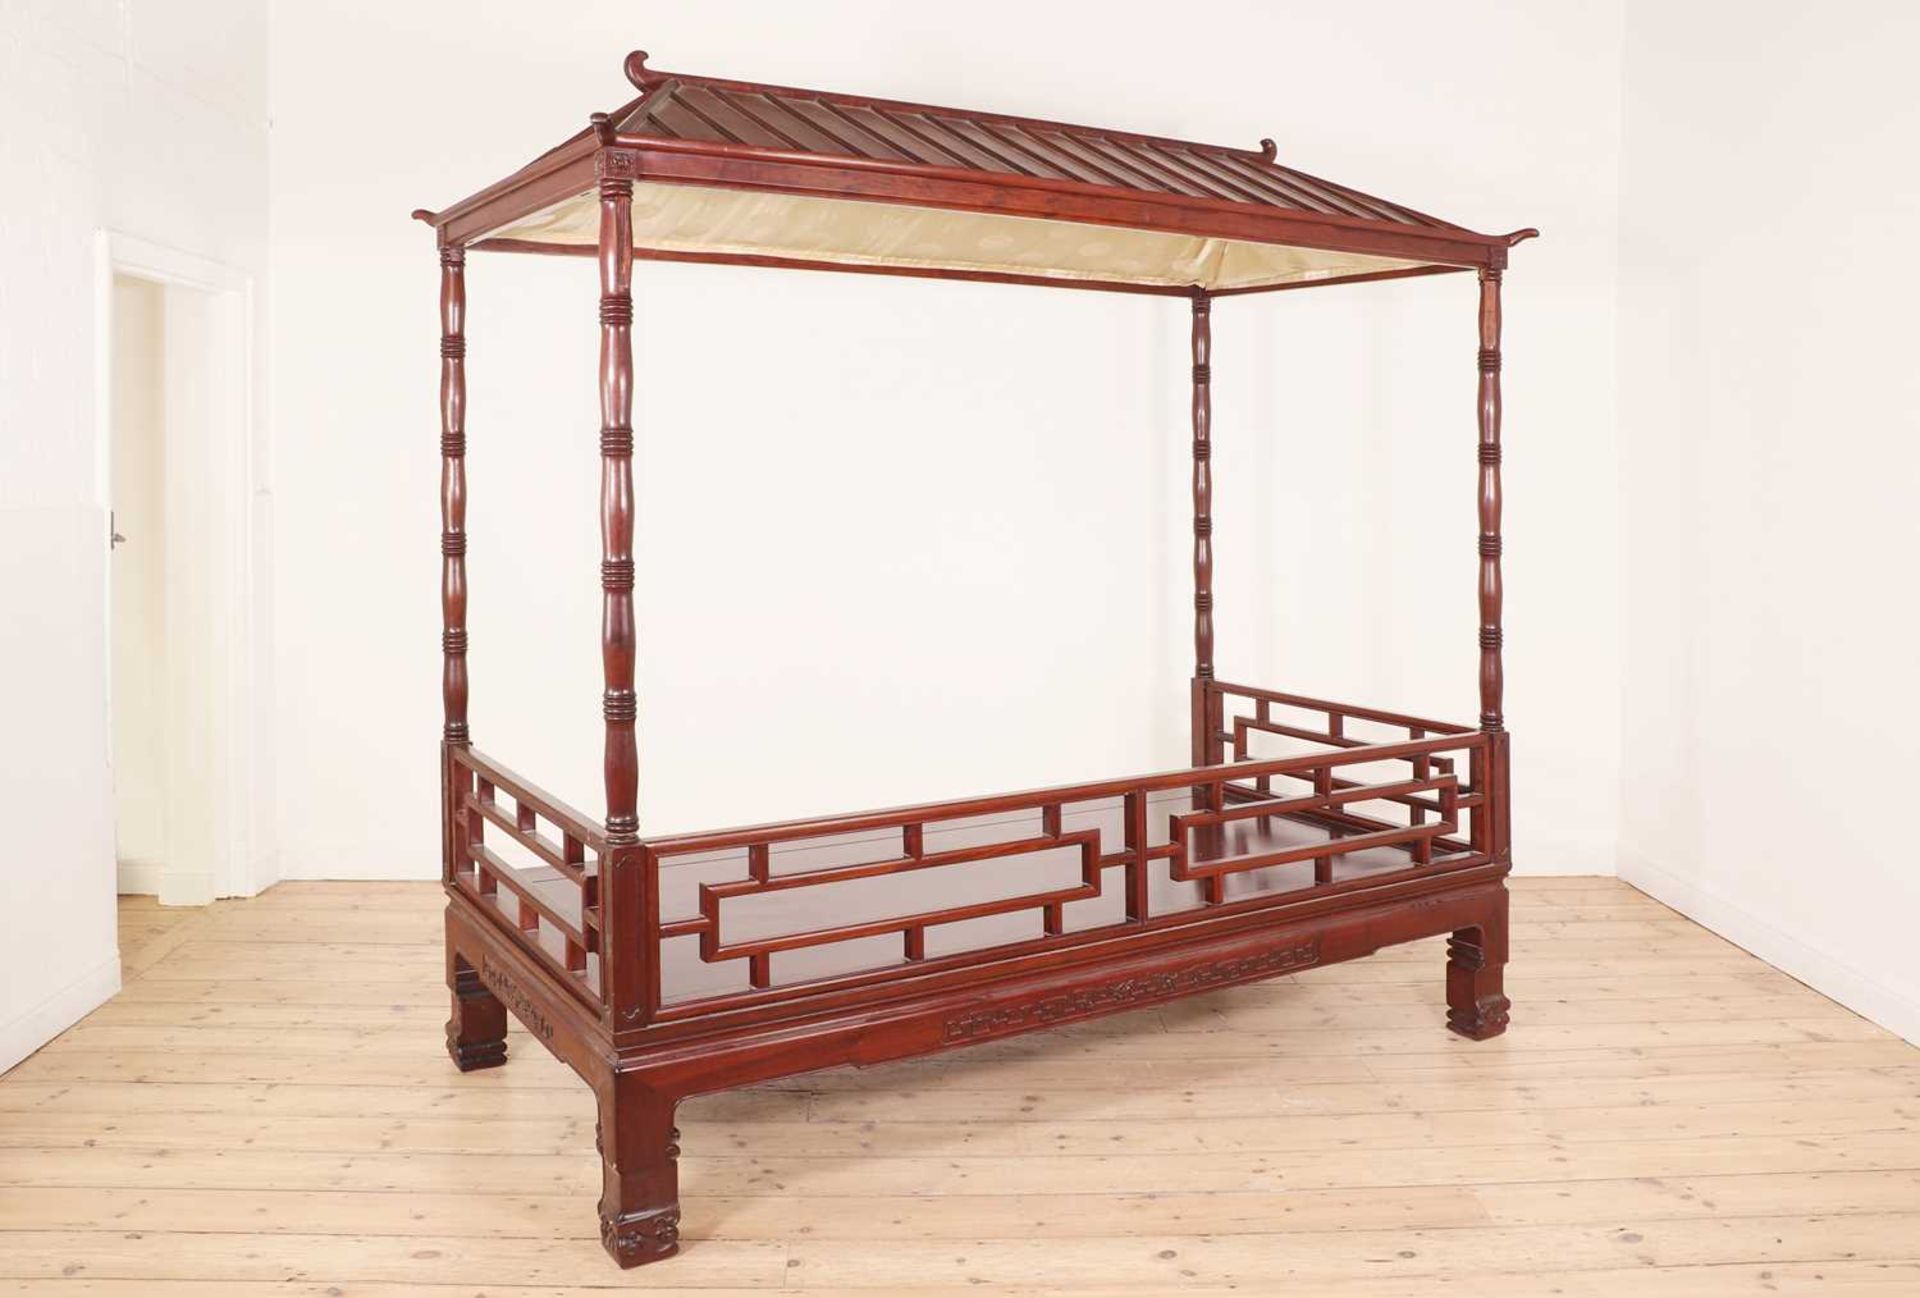 A hardwood daybed in the Chinese Qing dynasty style, - Image 3 of 9